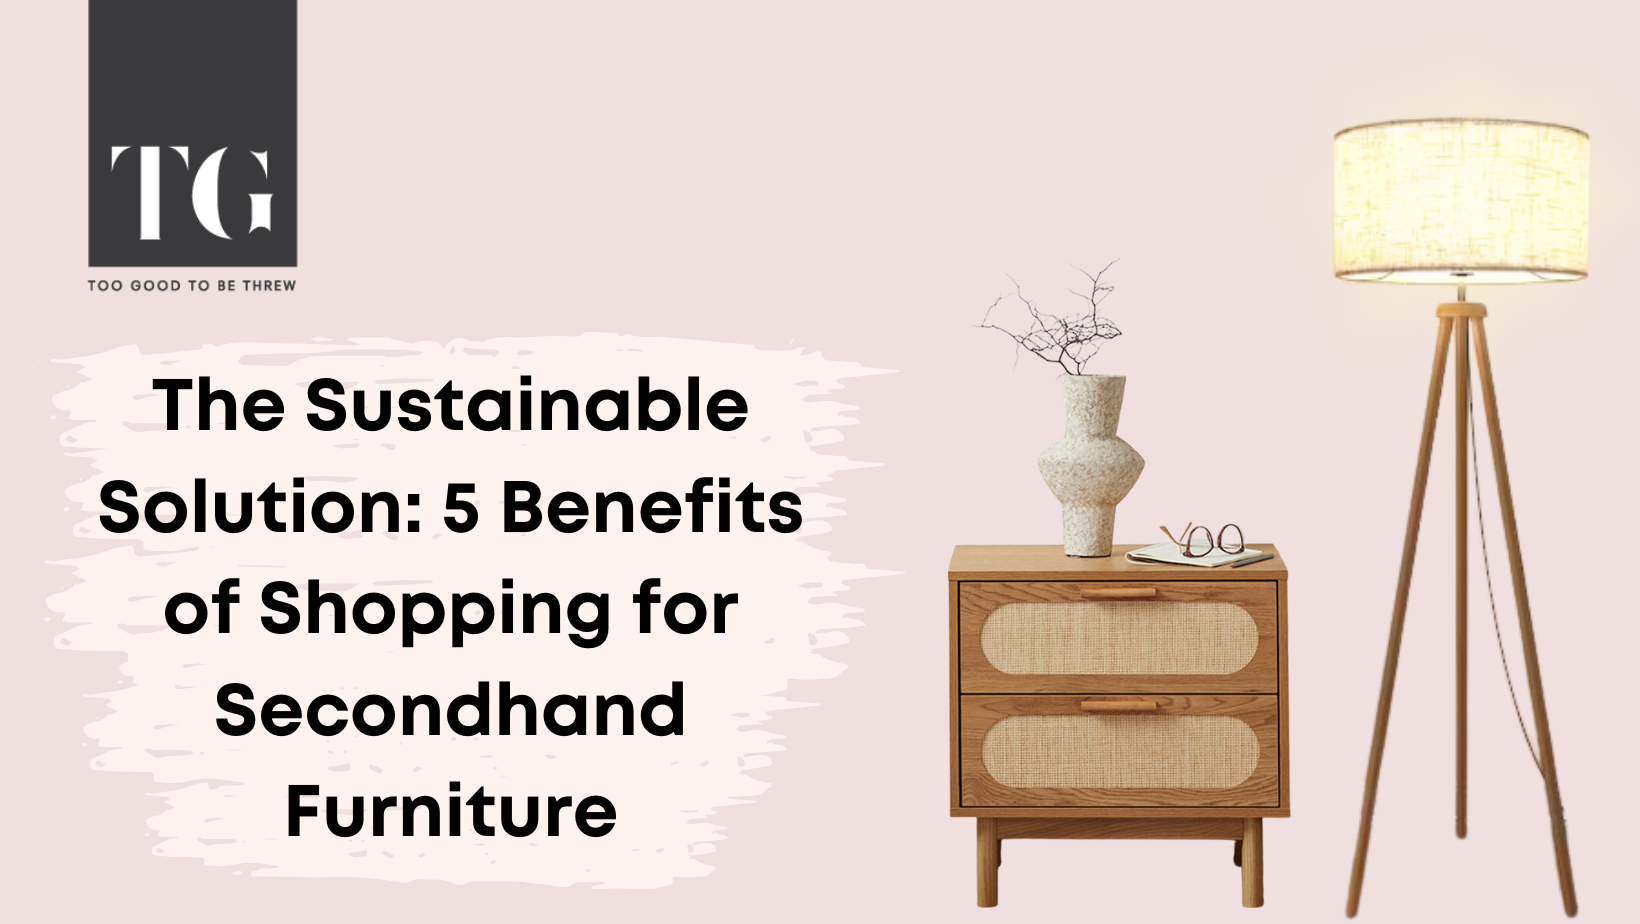 The Sustainable Solution: 5 Benefits of Shopping for Secondhand Furniture